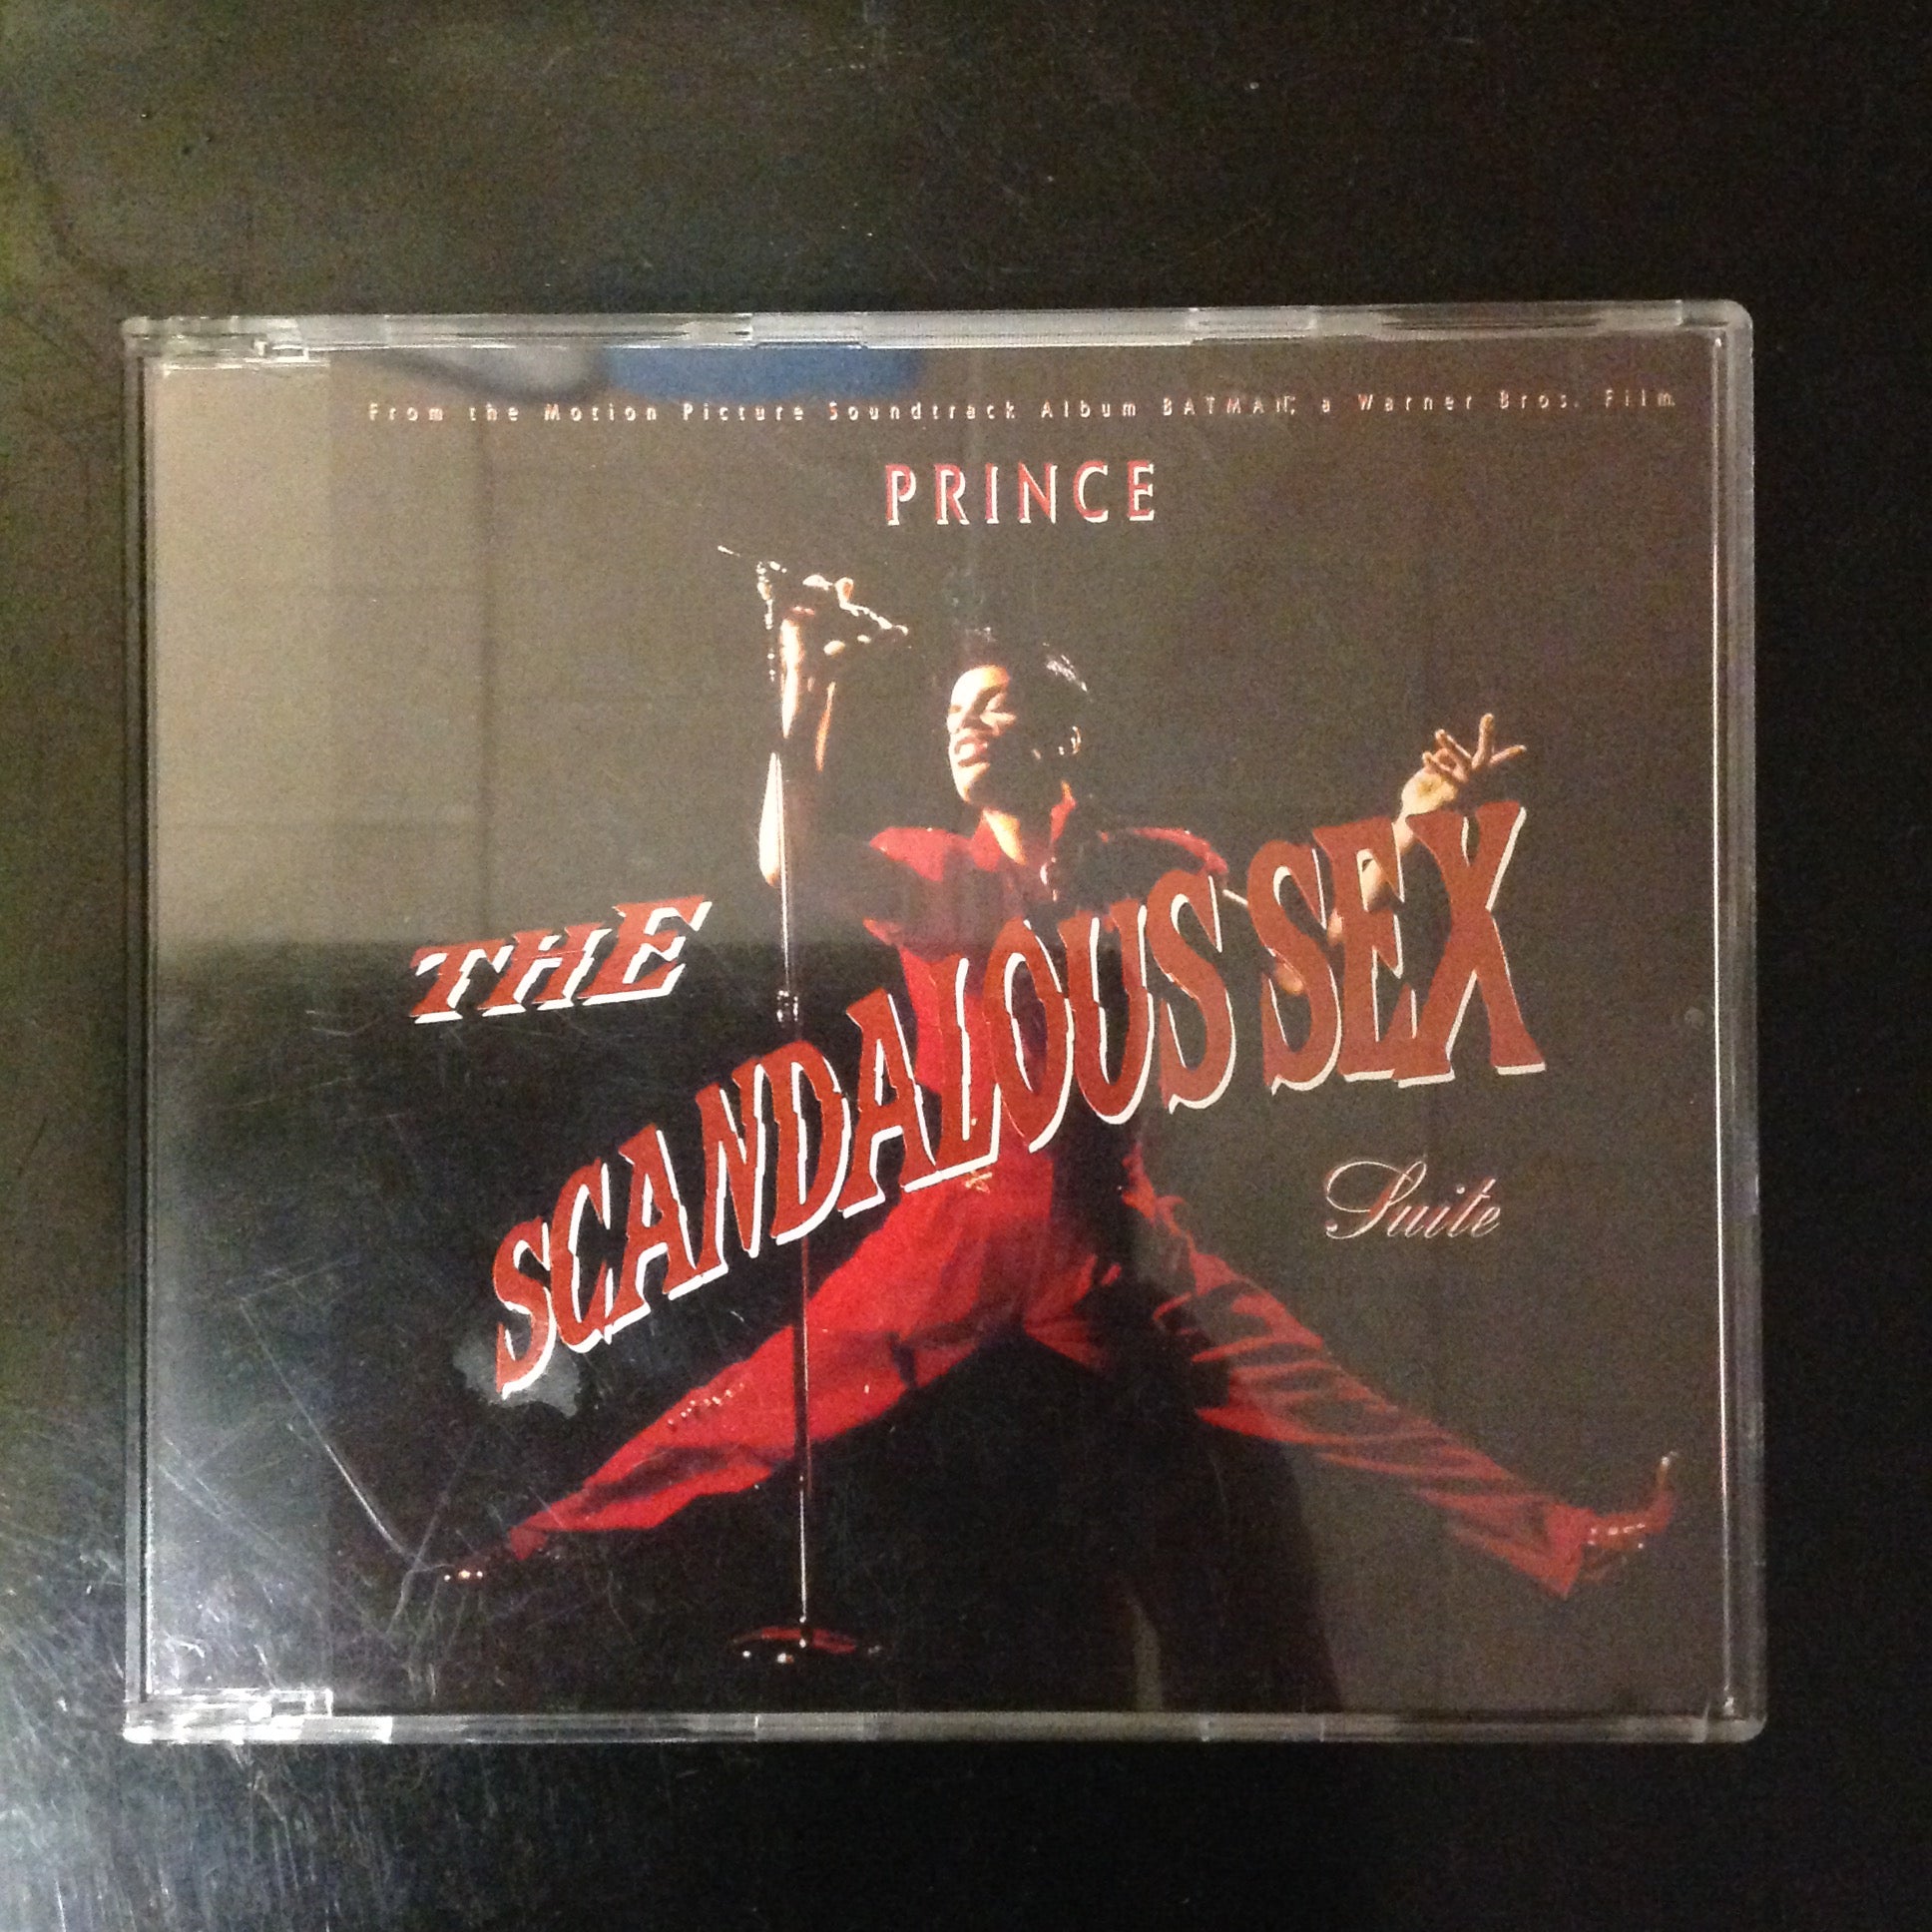 CD Prince The Scandalous Sex Suite 1987 WPCR-1515 RARE Japan Issue From Motion Picture Soundtrack Batman Warner Brothers